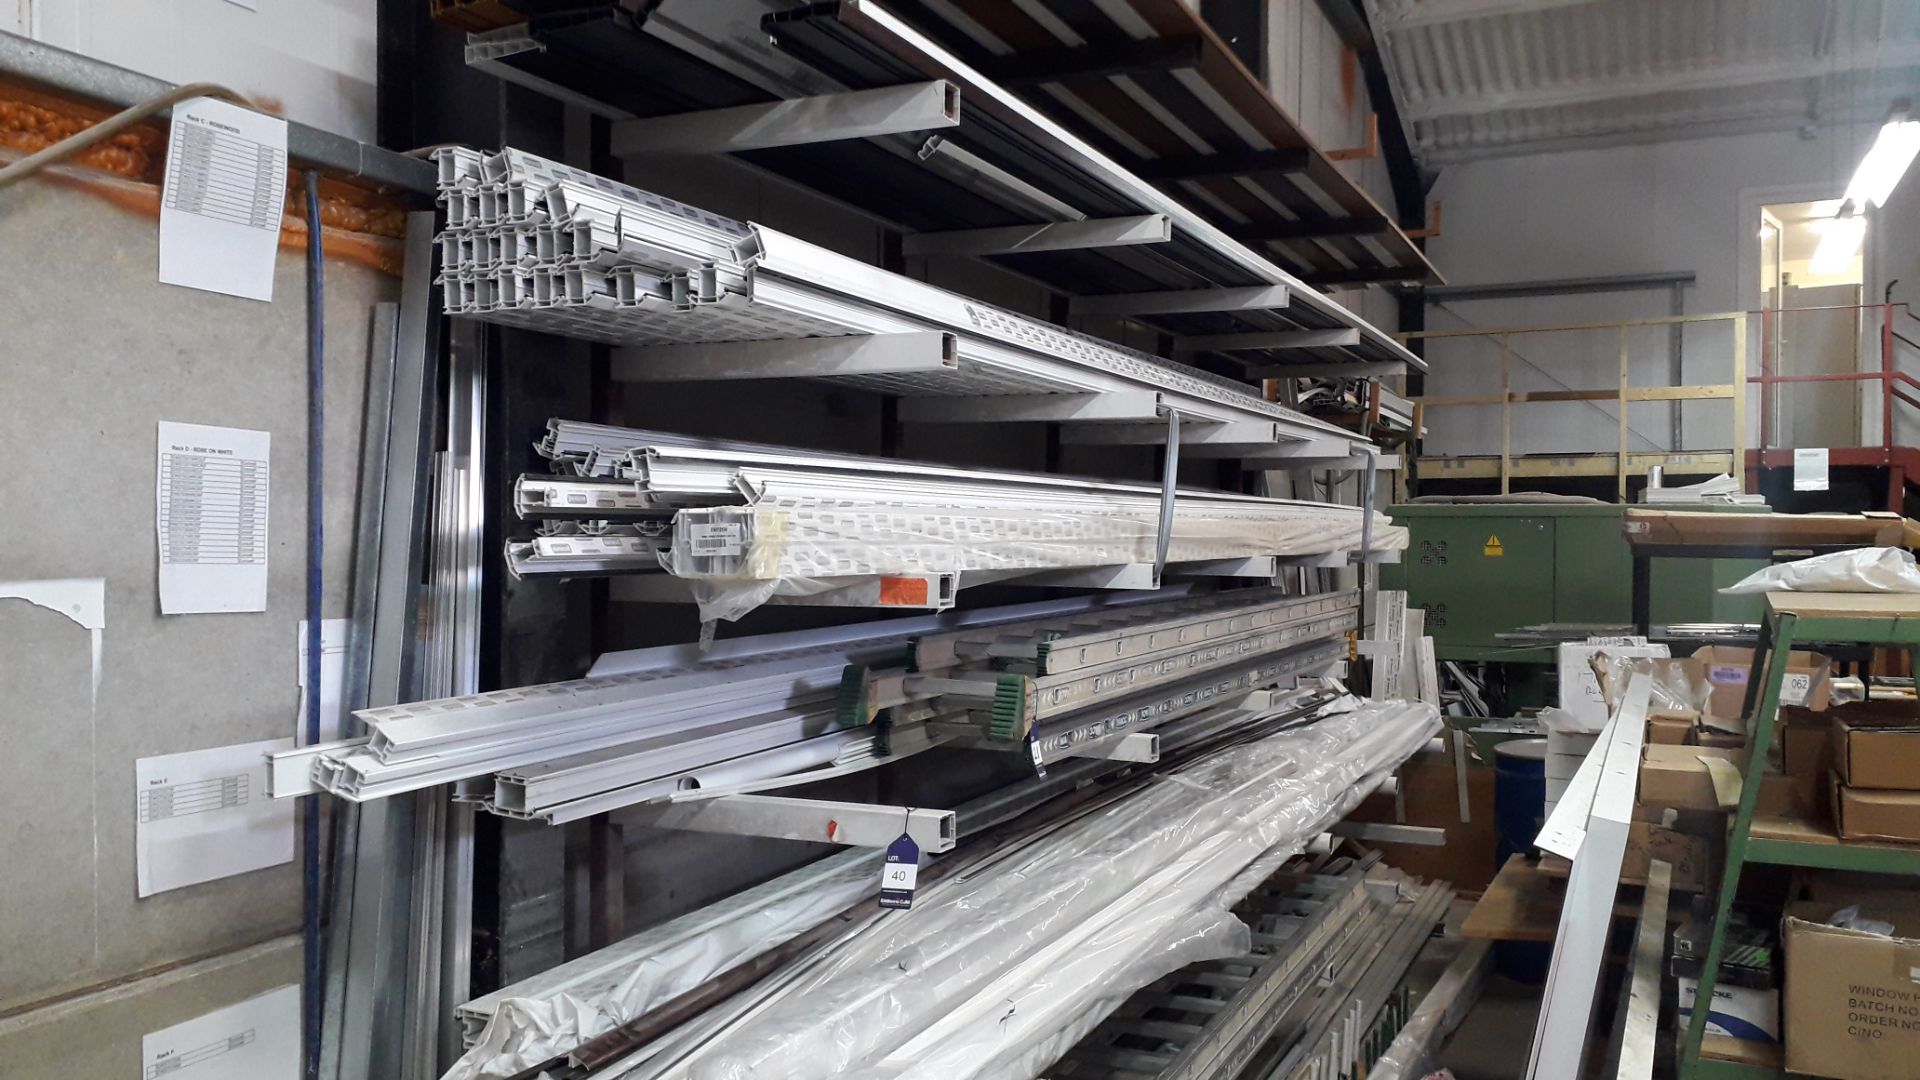 Large Quantity of UPVC Seals, Profile and Trims etc. (up to 6m Length) – Excludes Lot 21 Ladders - Image 2 of 5